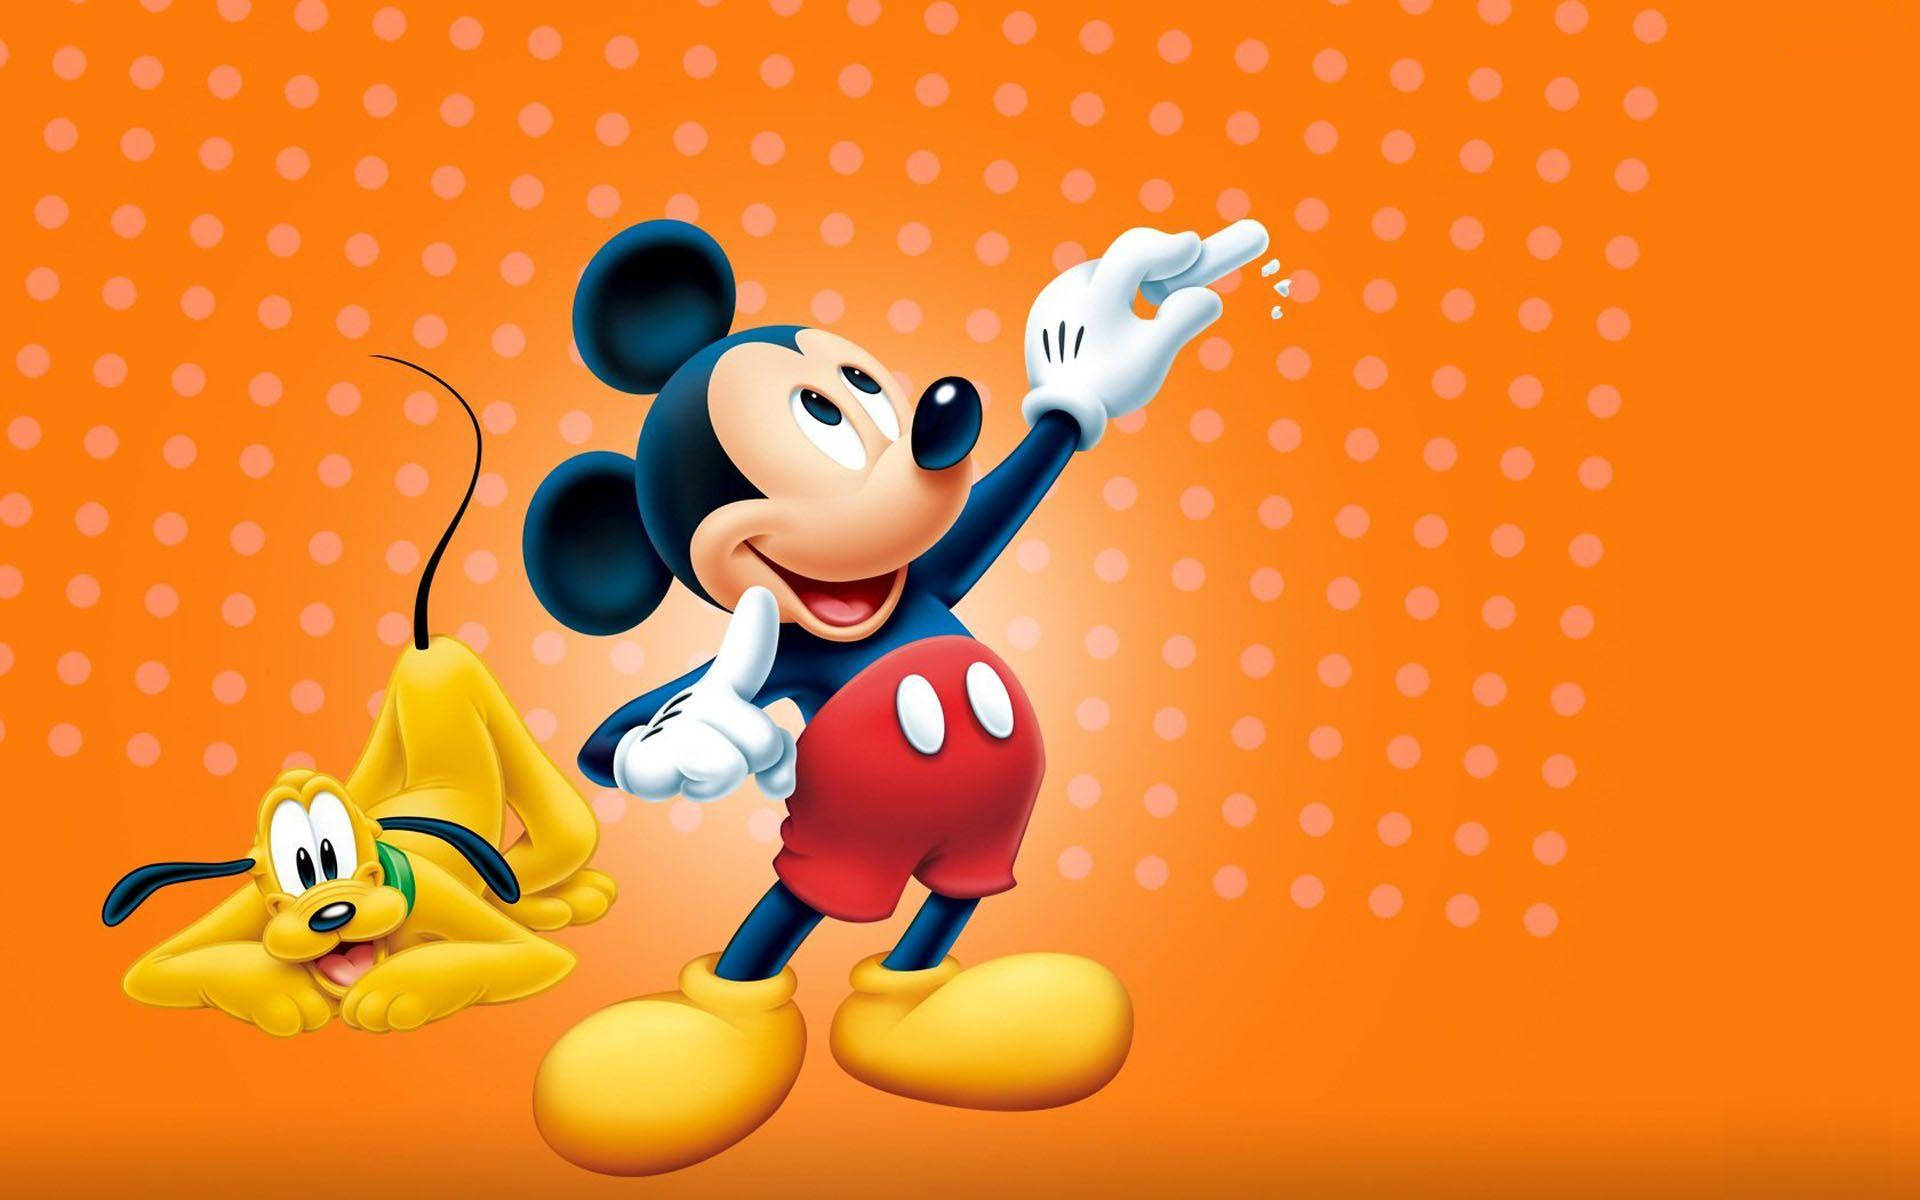 Mickey Mouse and Pluto best friends forever Wallpaper